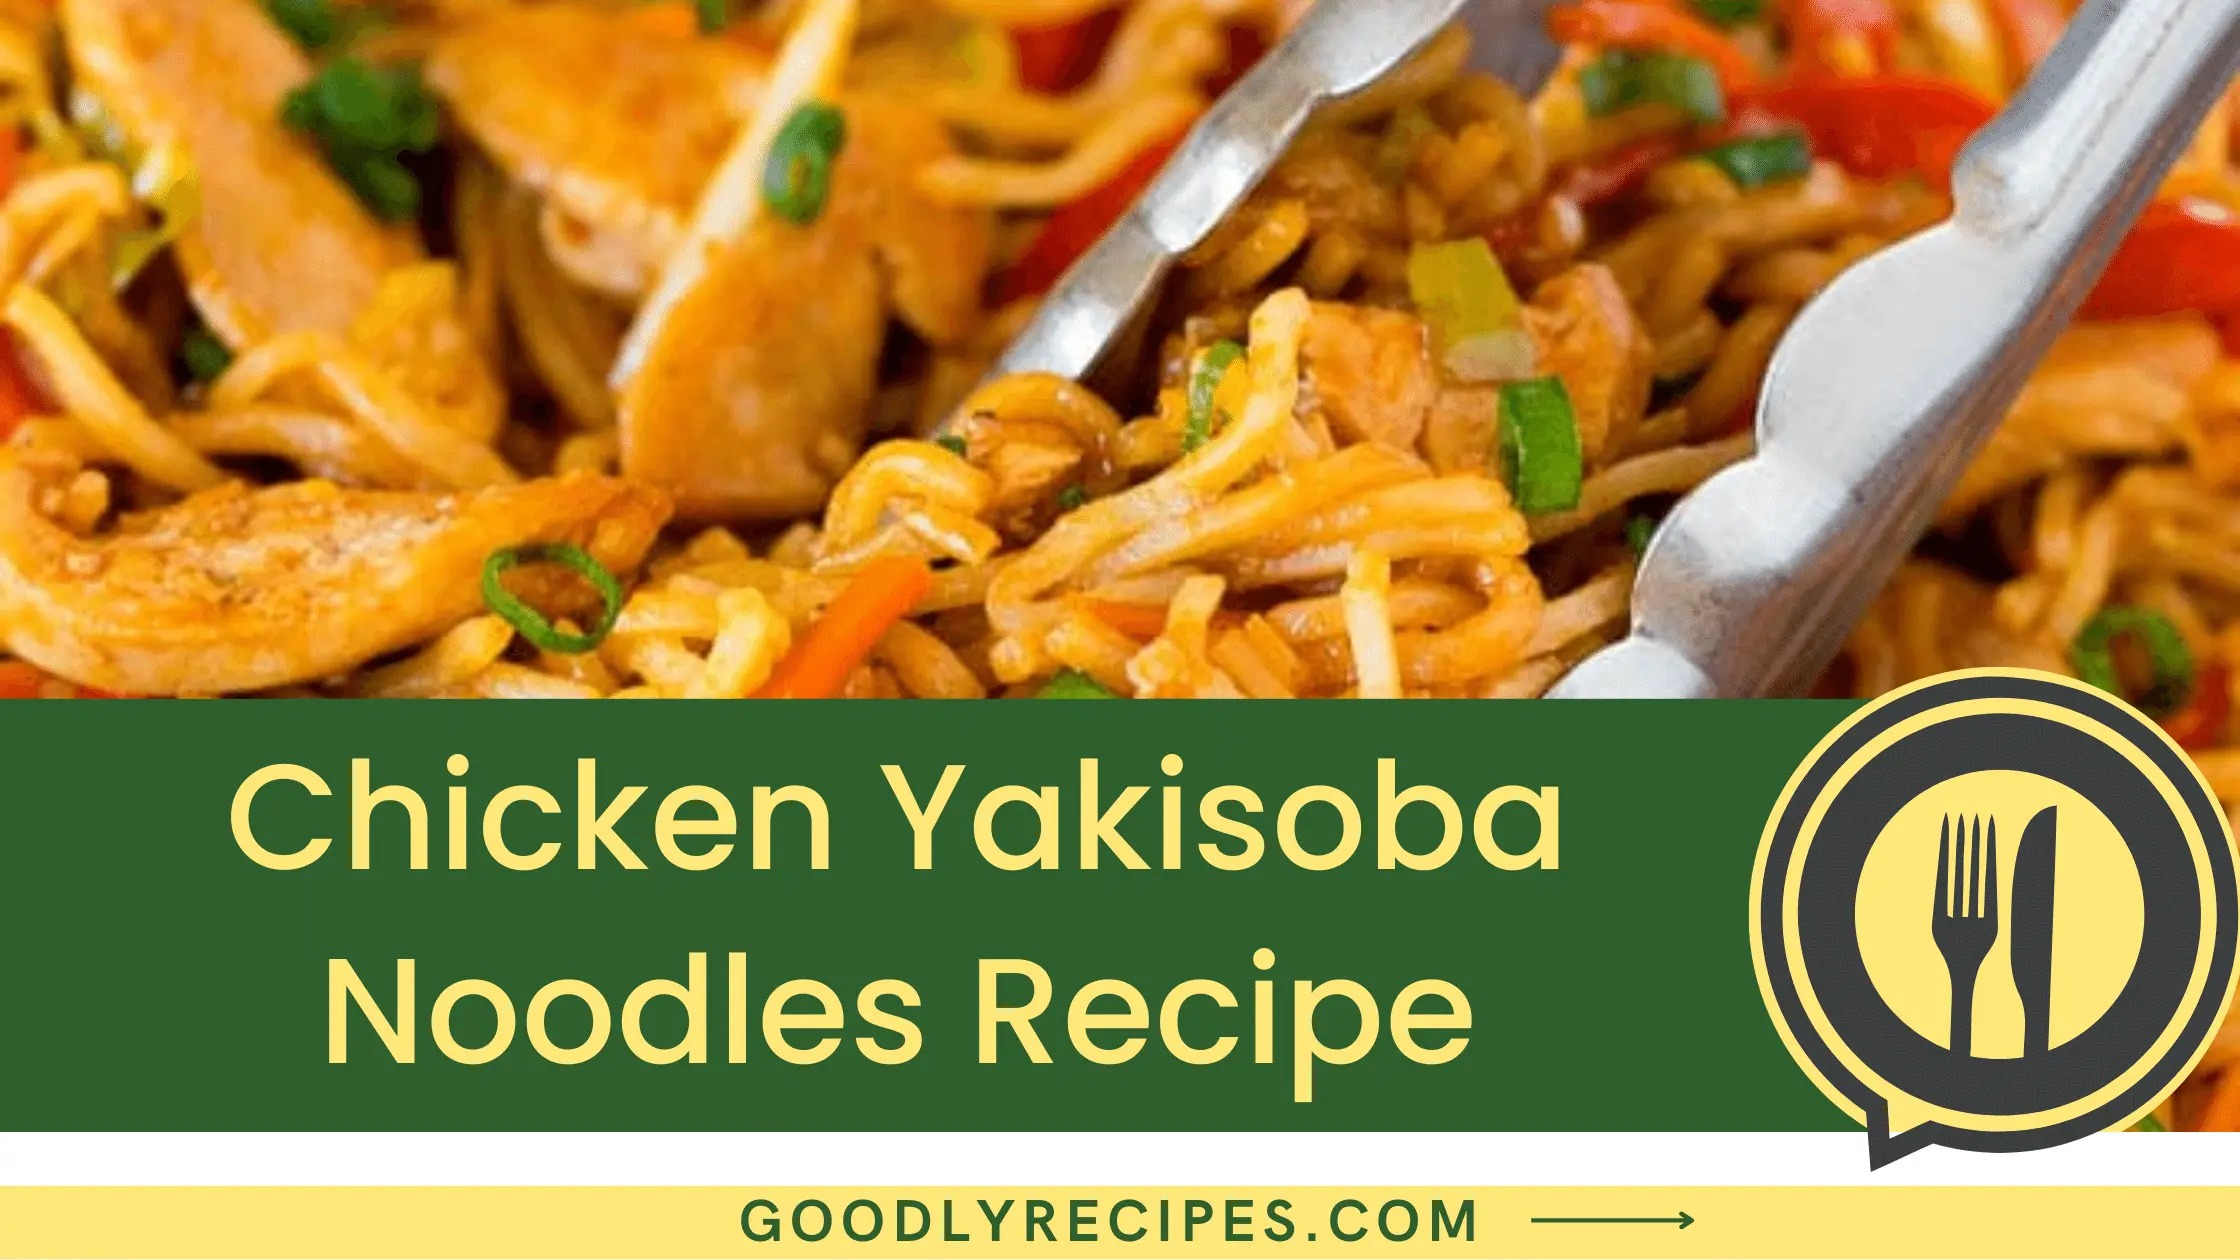 What are Chicken Yakisoba Noodles?